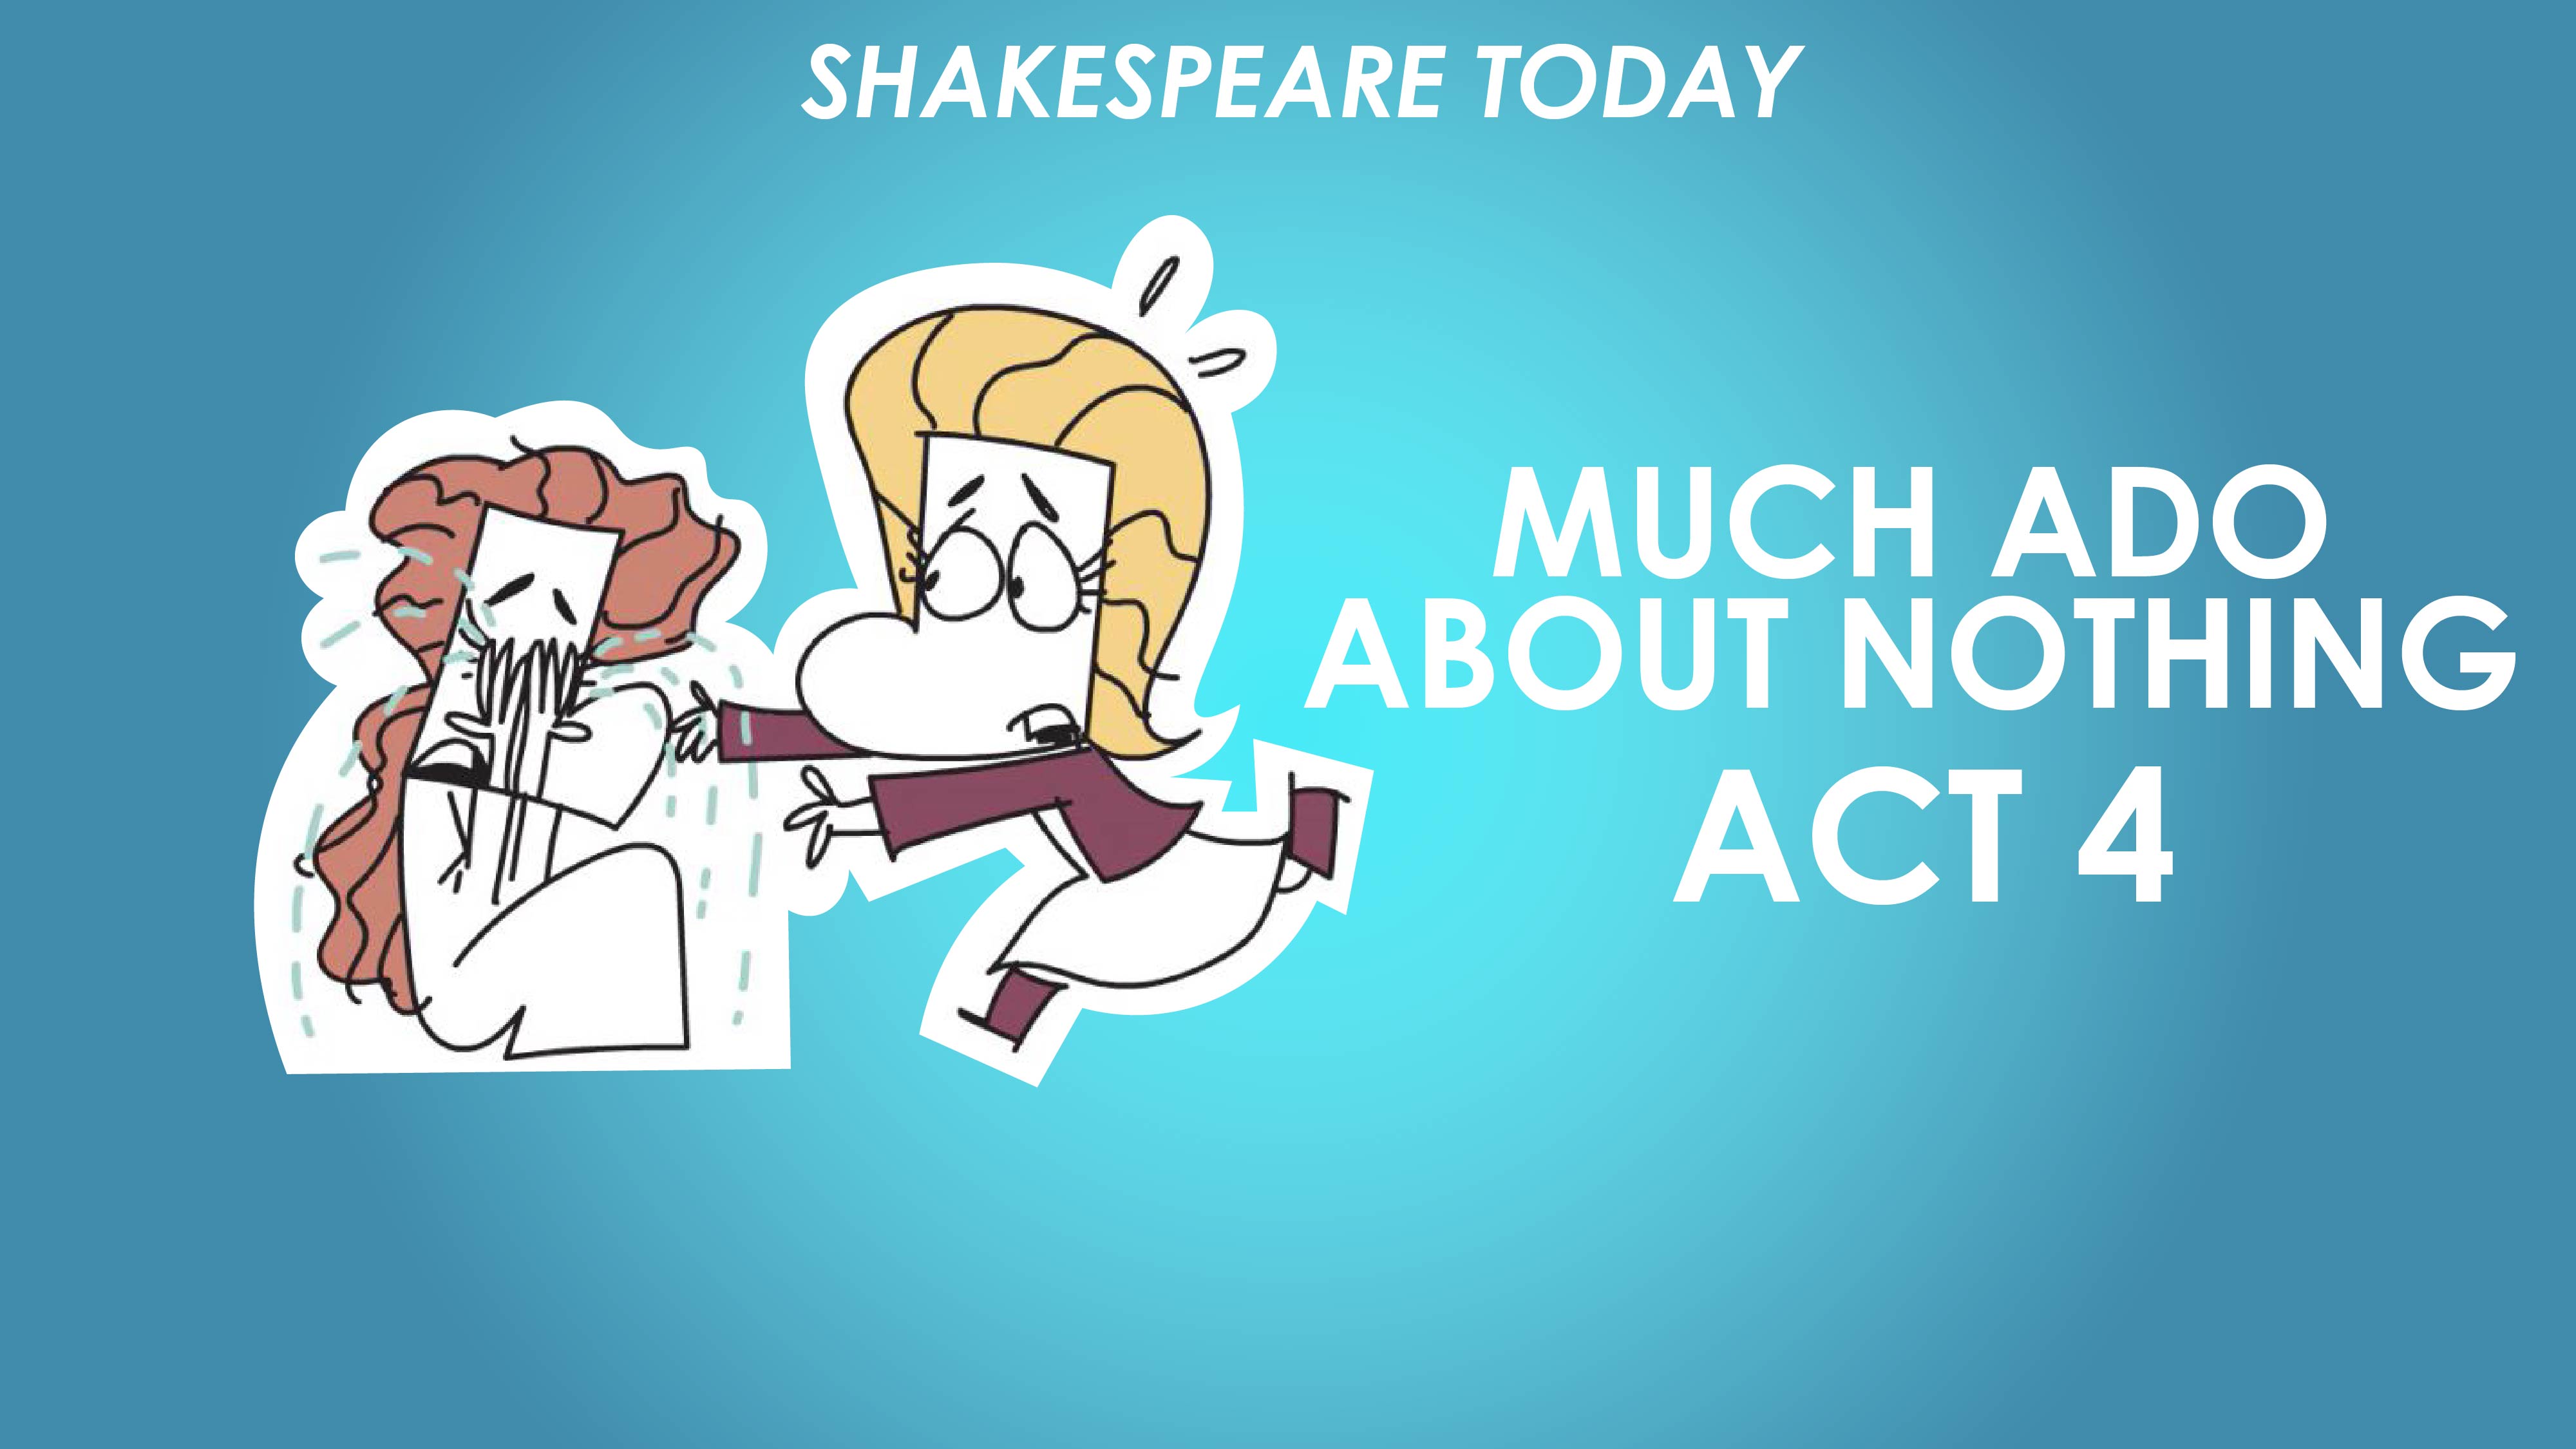 Much Ado About Nothing Act 4 - Shakespeare Today Series